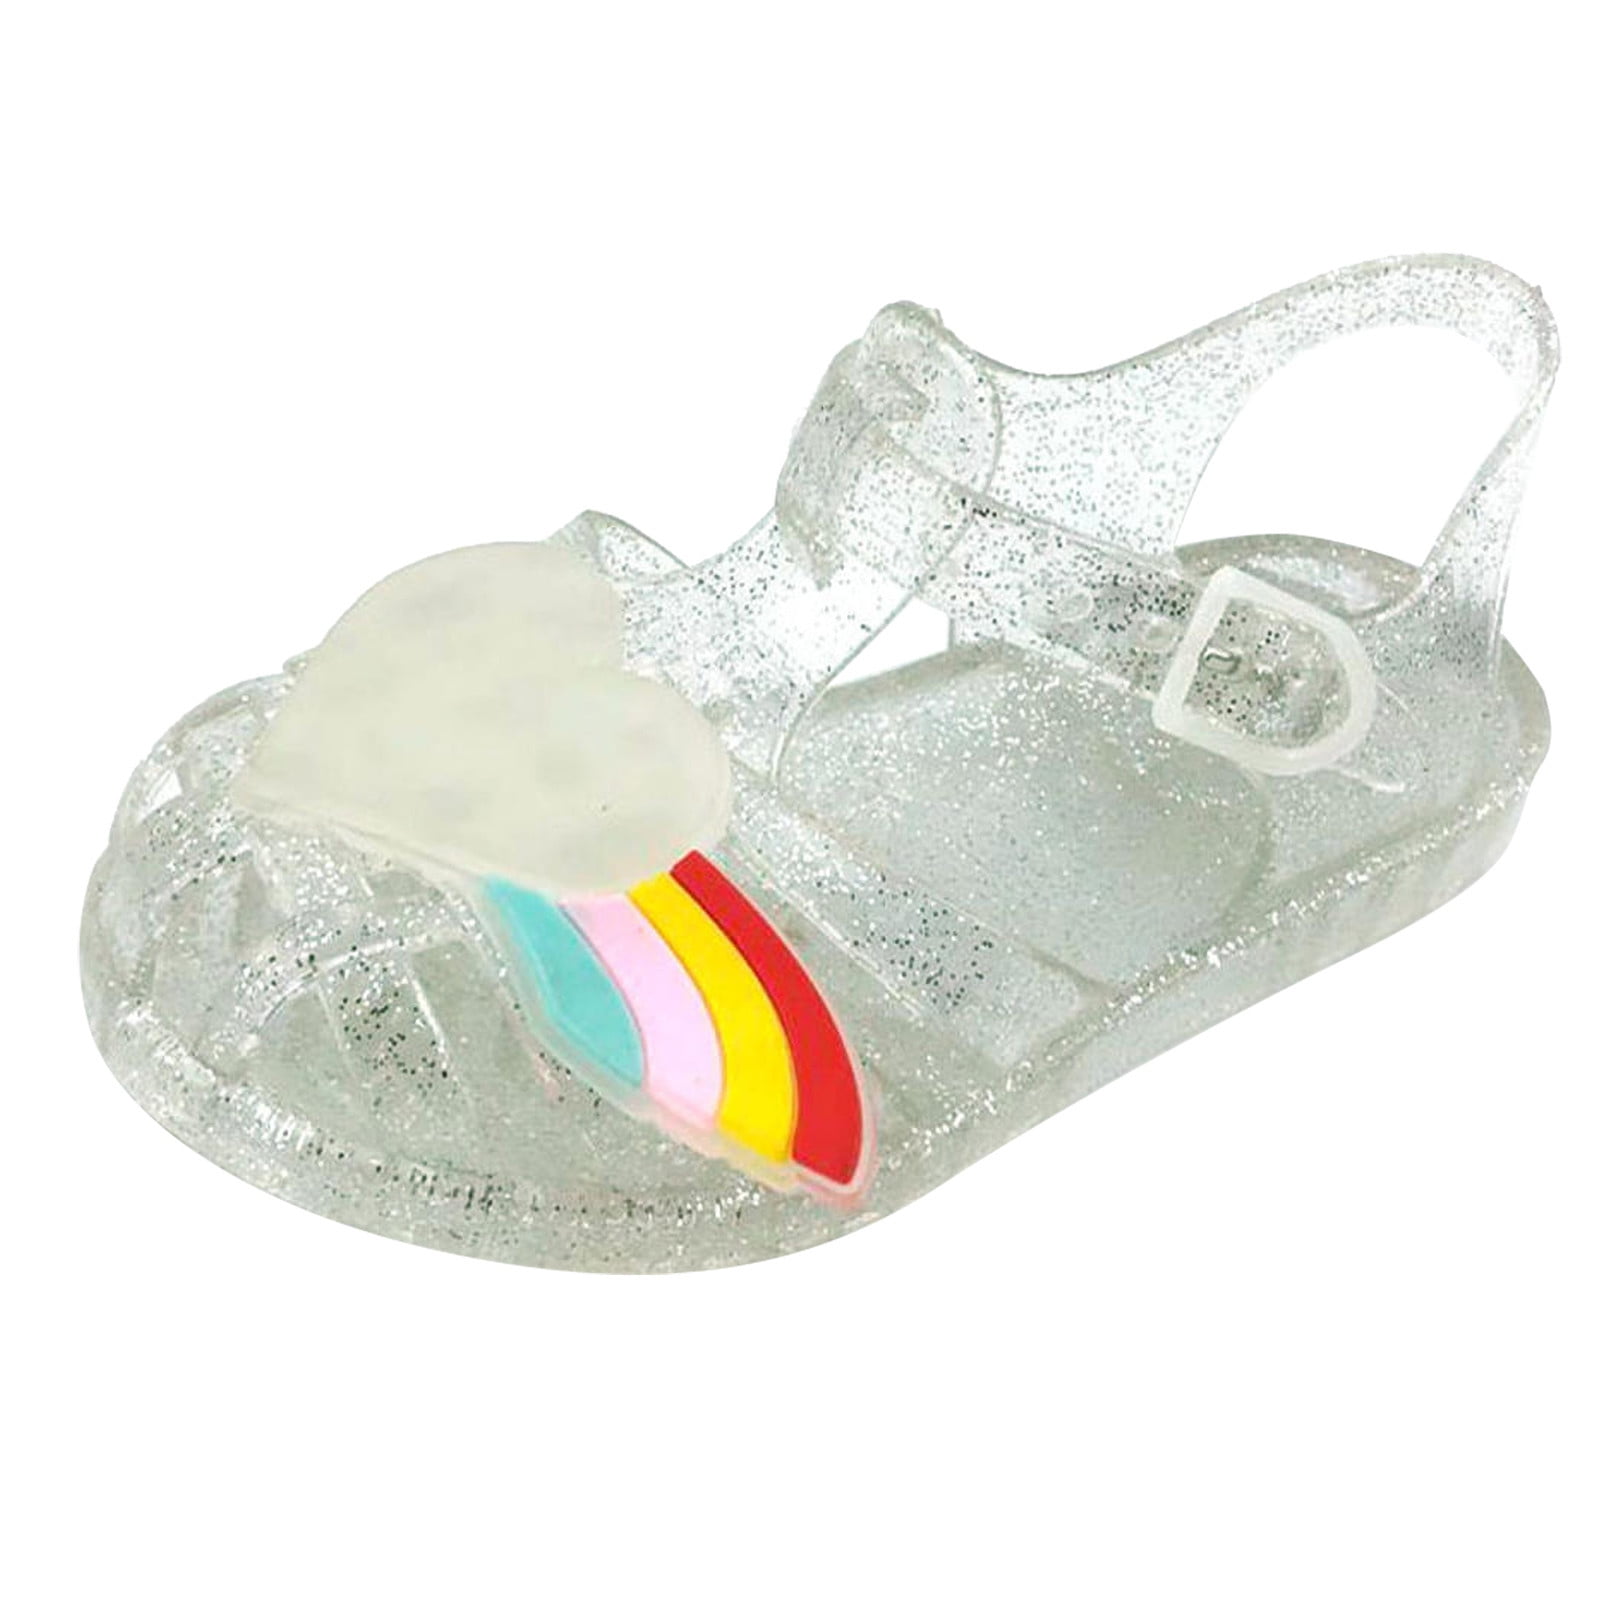 VerPetridure Clearance Kids Sandals Clearance Under $10 Toddler Shoes Baby  Girls Cute Fruit Jelly Colors Hollow Out Non-slip Soft Sole Beach Roman  Sandals 